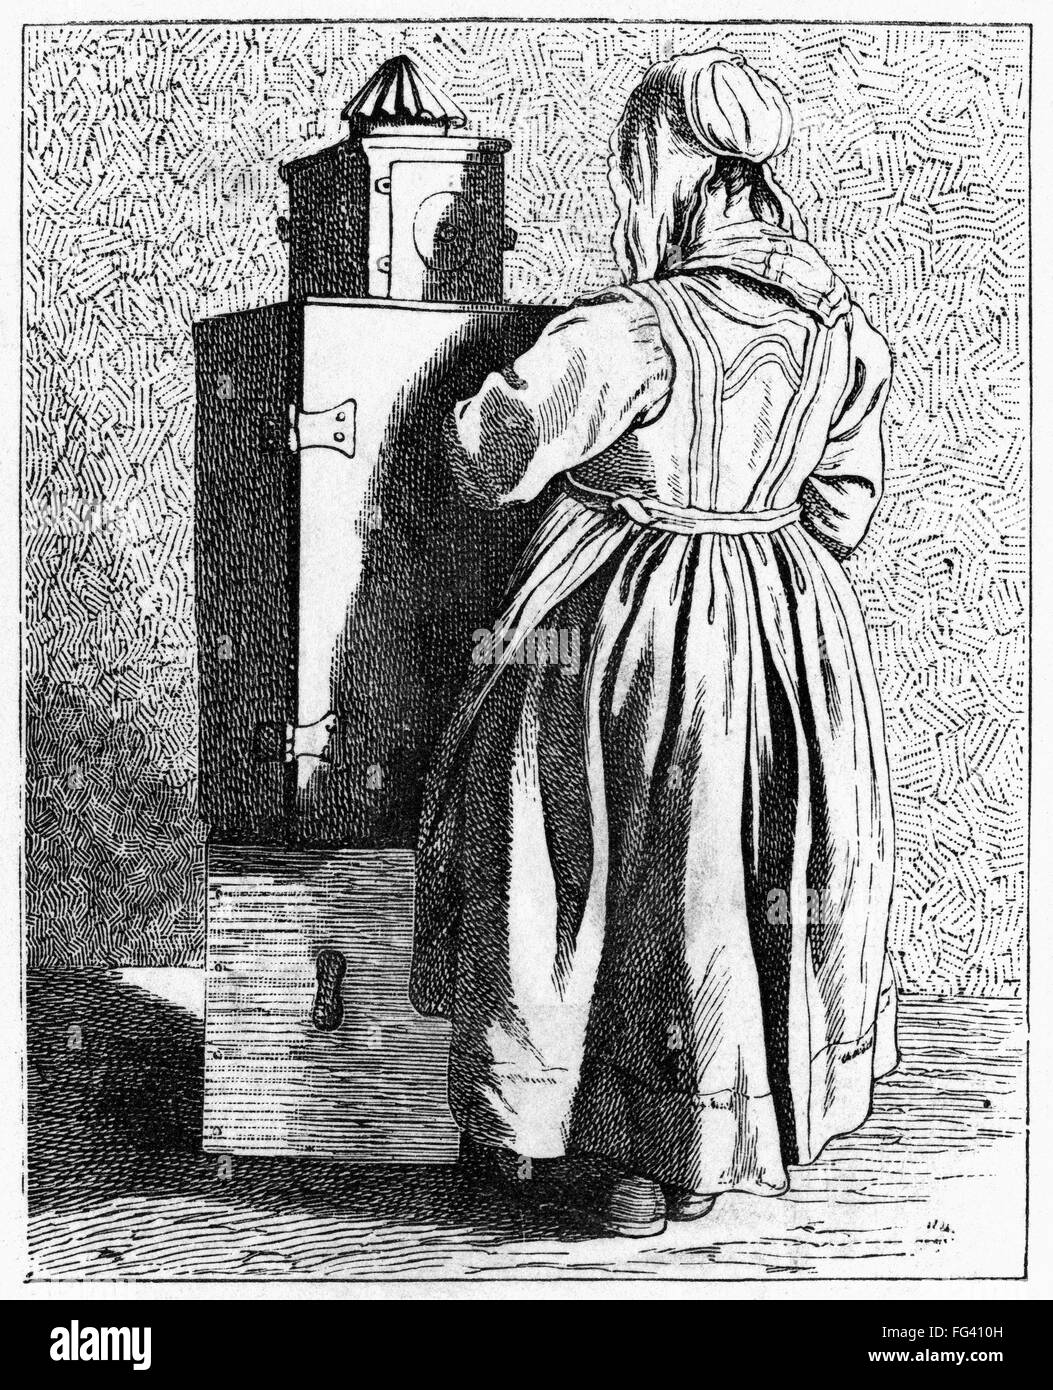 PARIS: MAGIC LANTERN, c1740. /nA woman projecting a magic lantern show on the streets of Paris, France. Engraving, 1875, after an etching by EdmΘ Bouchardon, c1740. Stock Photo